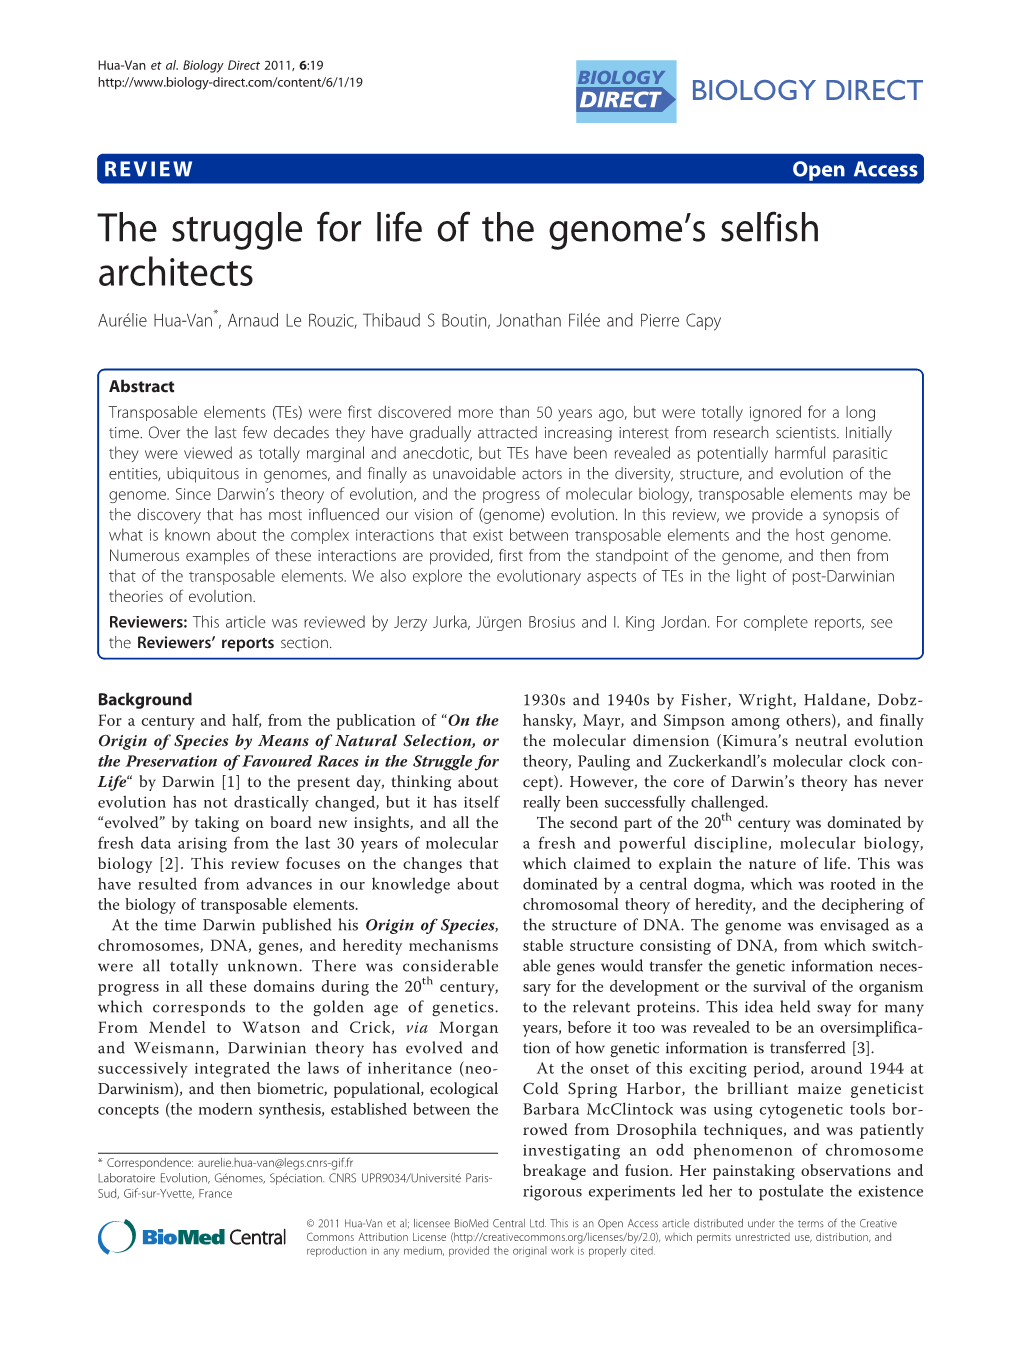 The Struggle for Life of the Genomels Selfish Architects